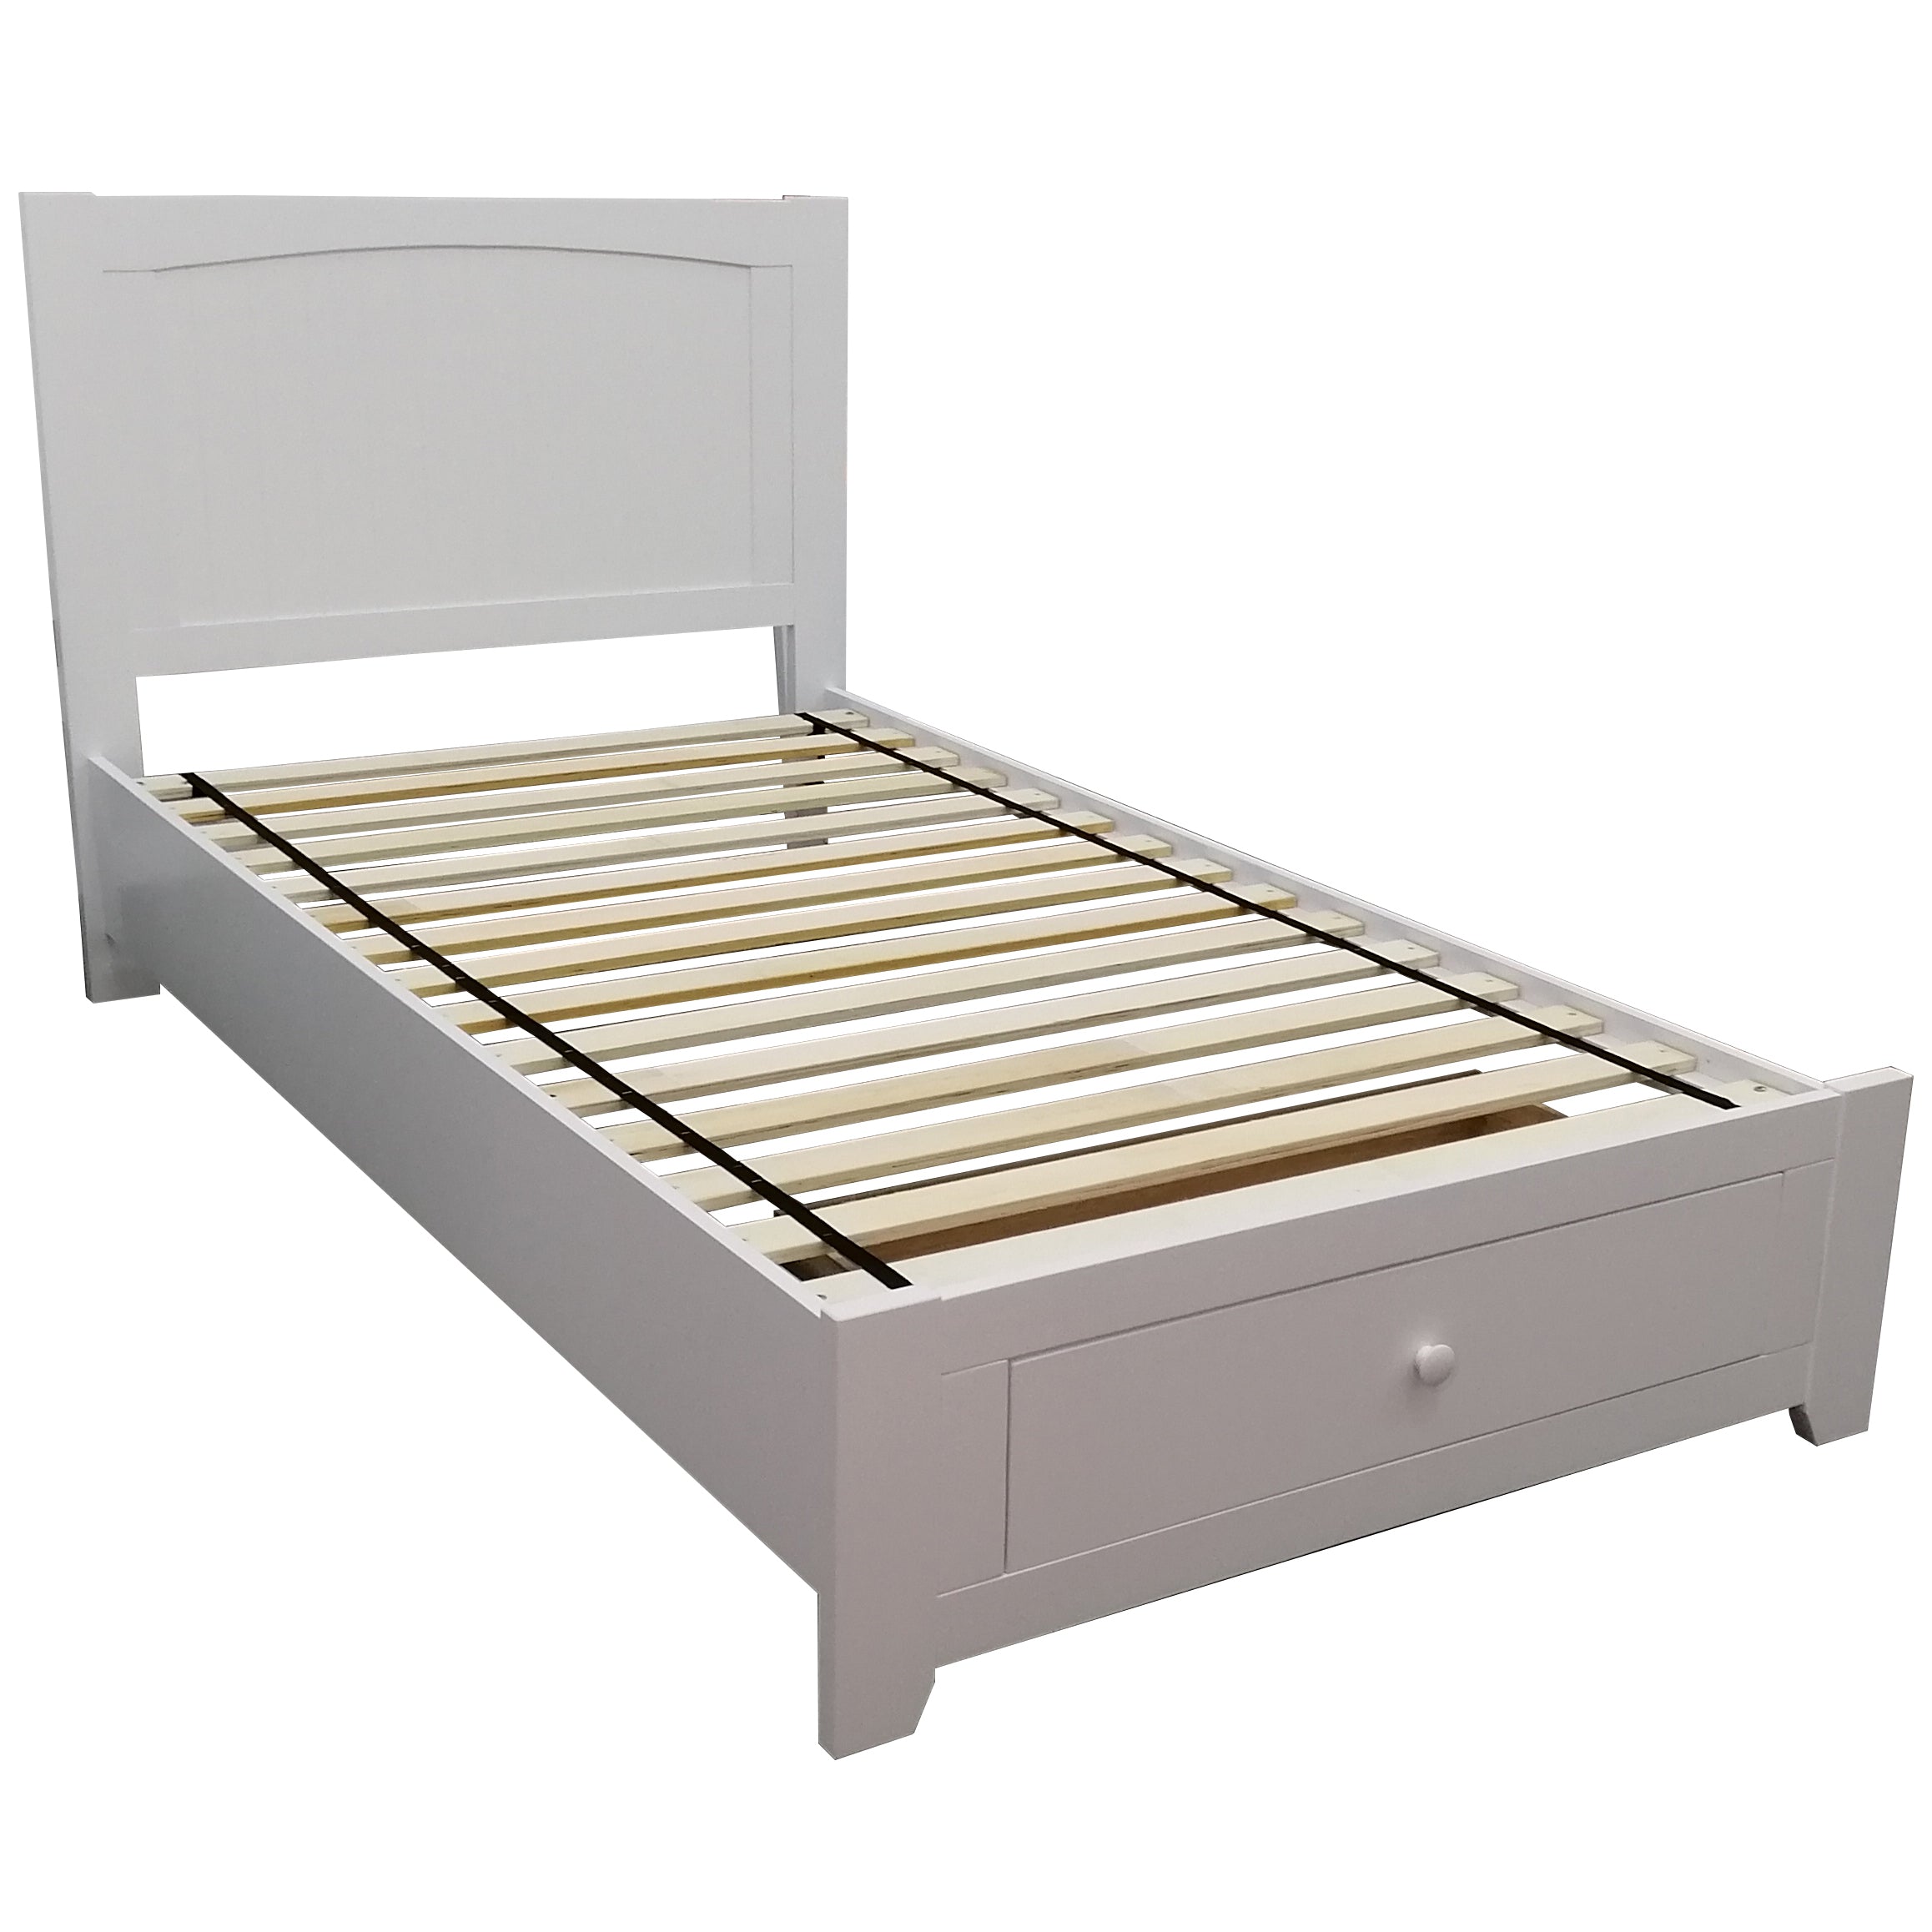 Out of Stock! King Single Size Bed Frame With Storage Drawer Timber Wood - White